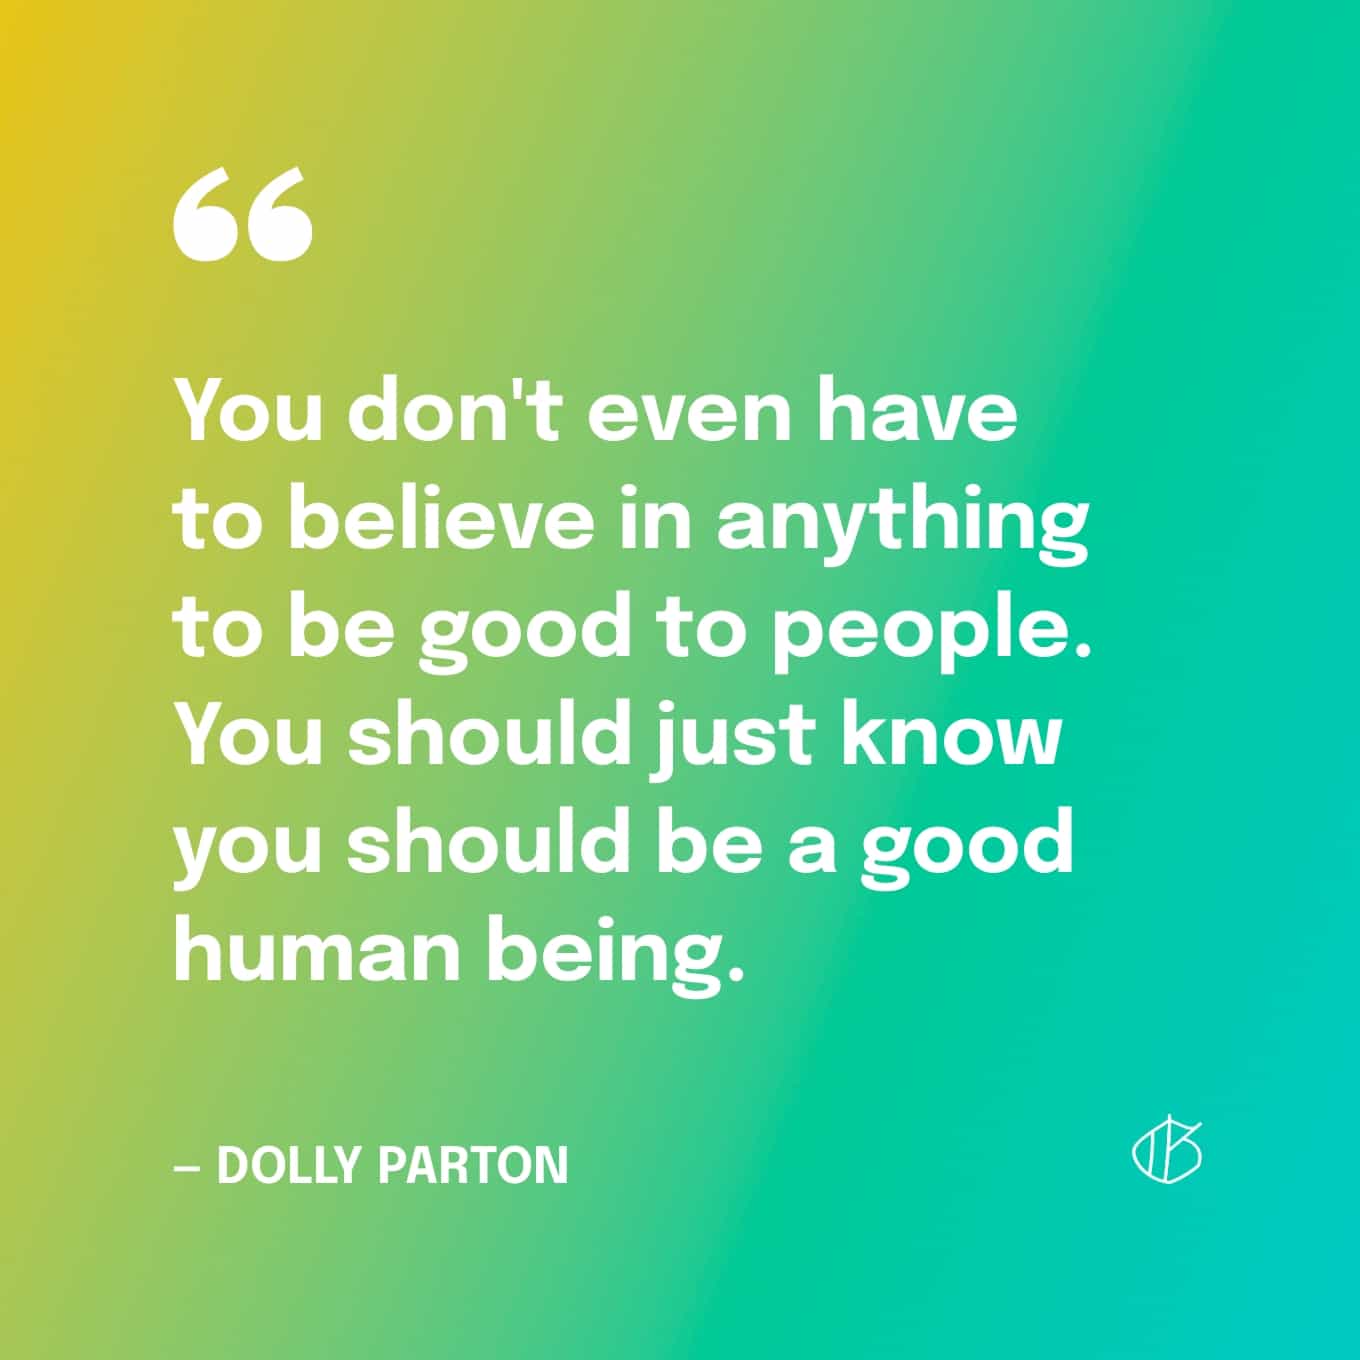 Dolly Parton Quote Wallpaper: You don't even have to believe in anything to be good to people. You should just know you should be a good human being.